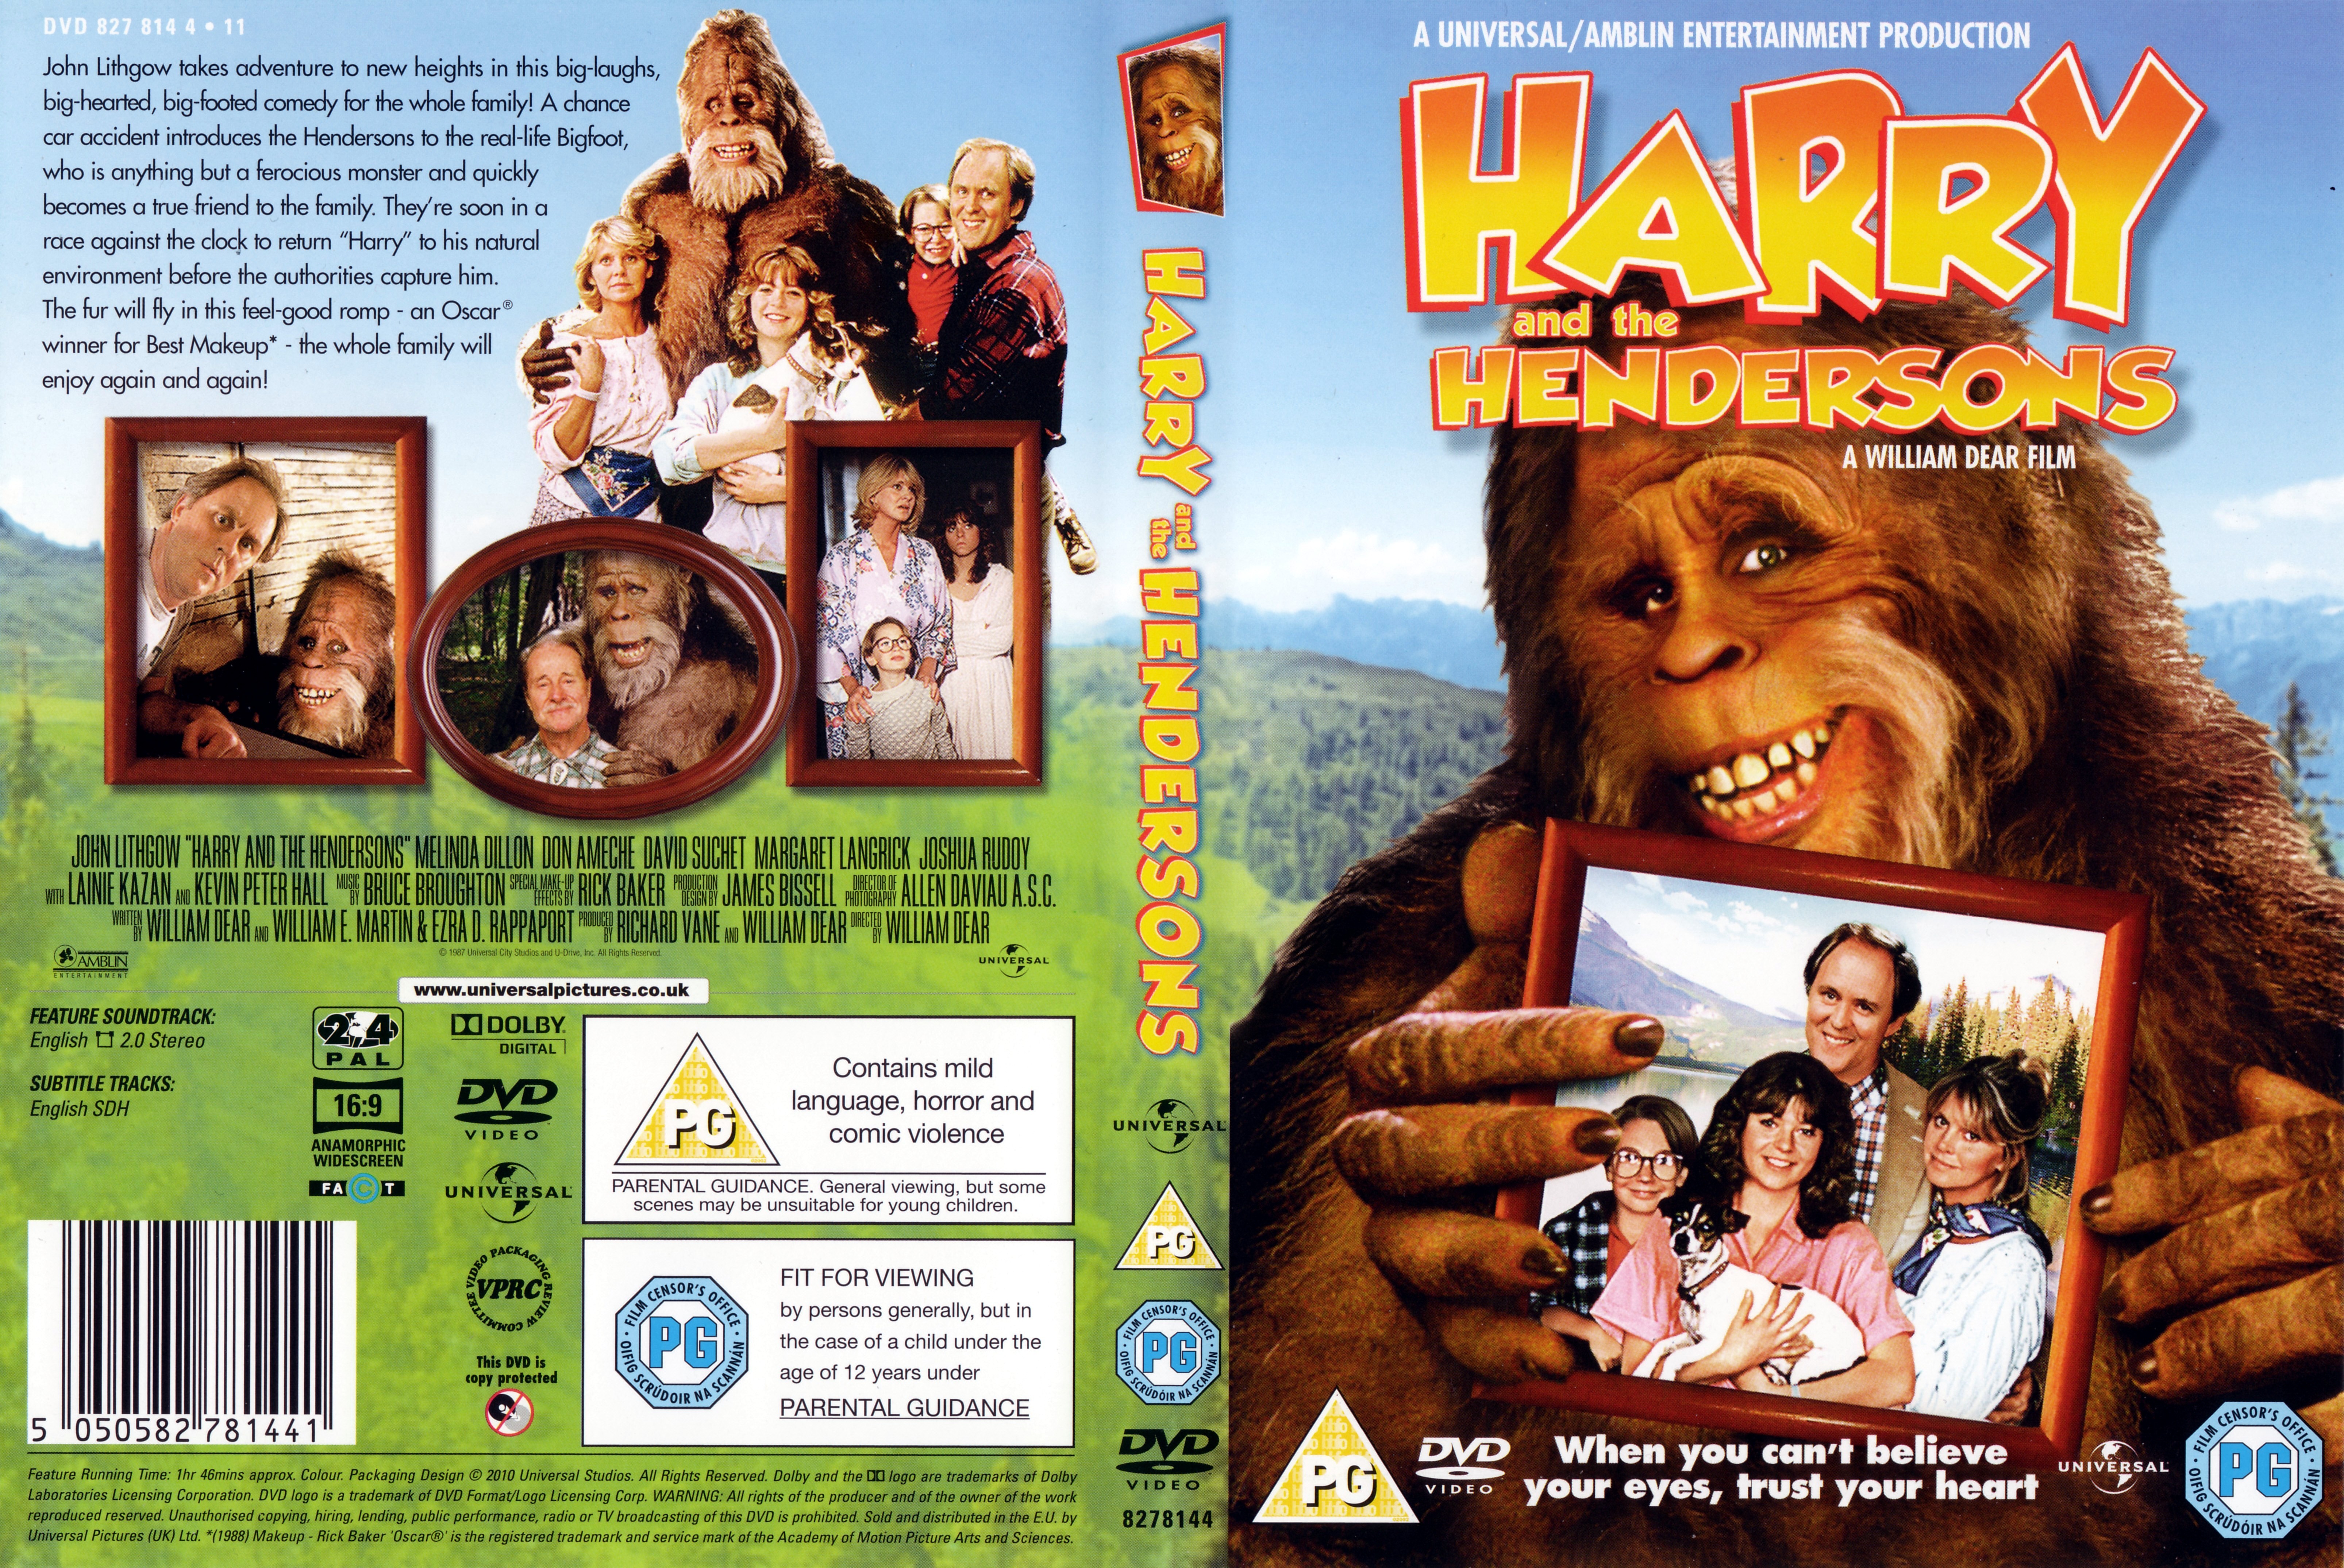 Jaquette DVD Harry and the hendersons Zone 1